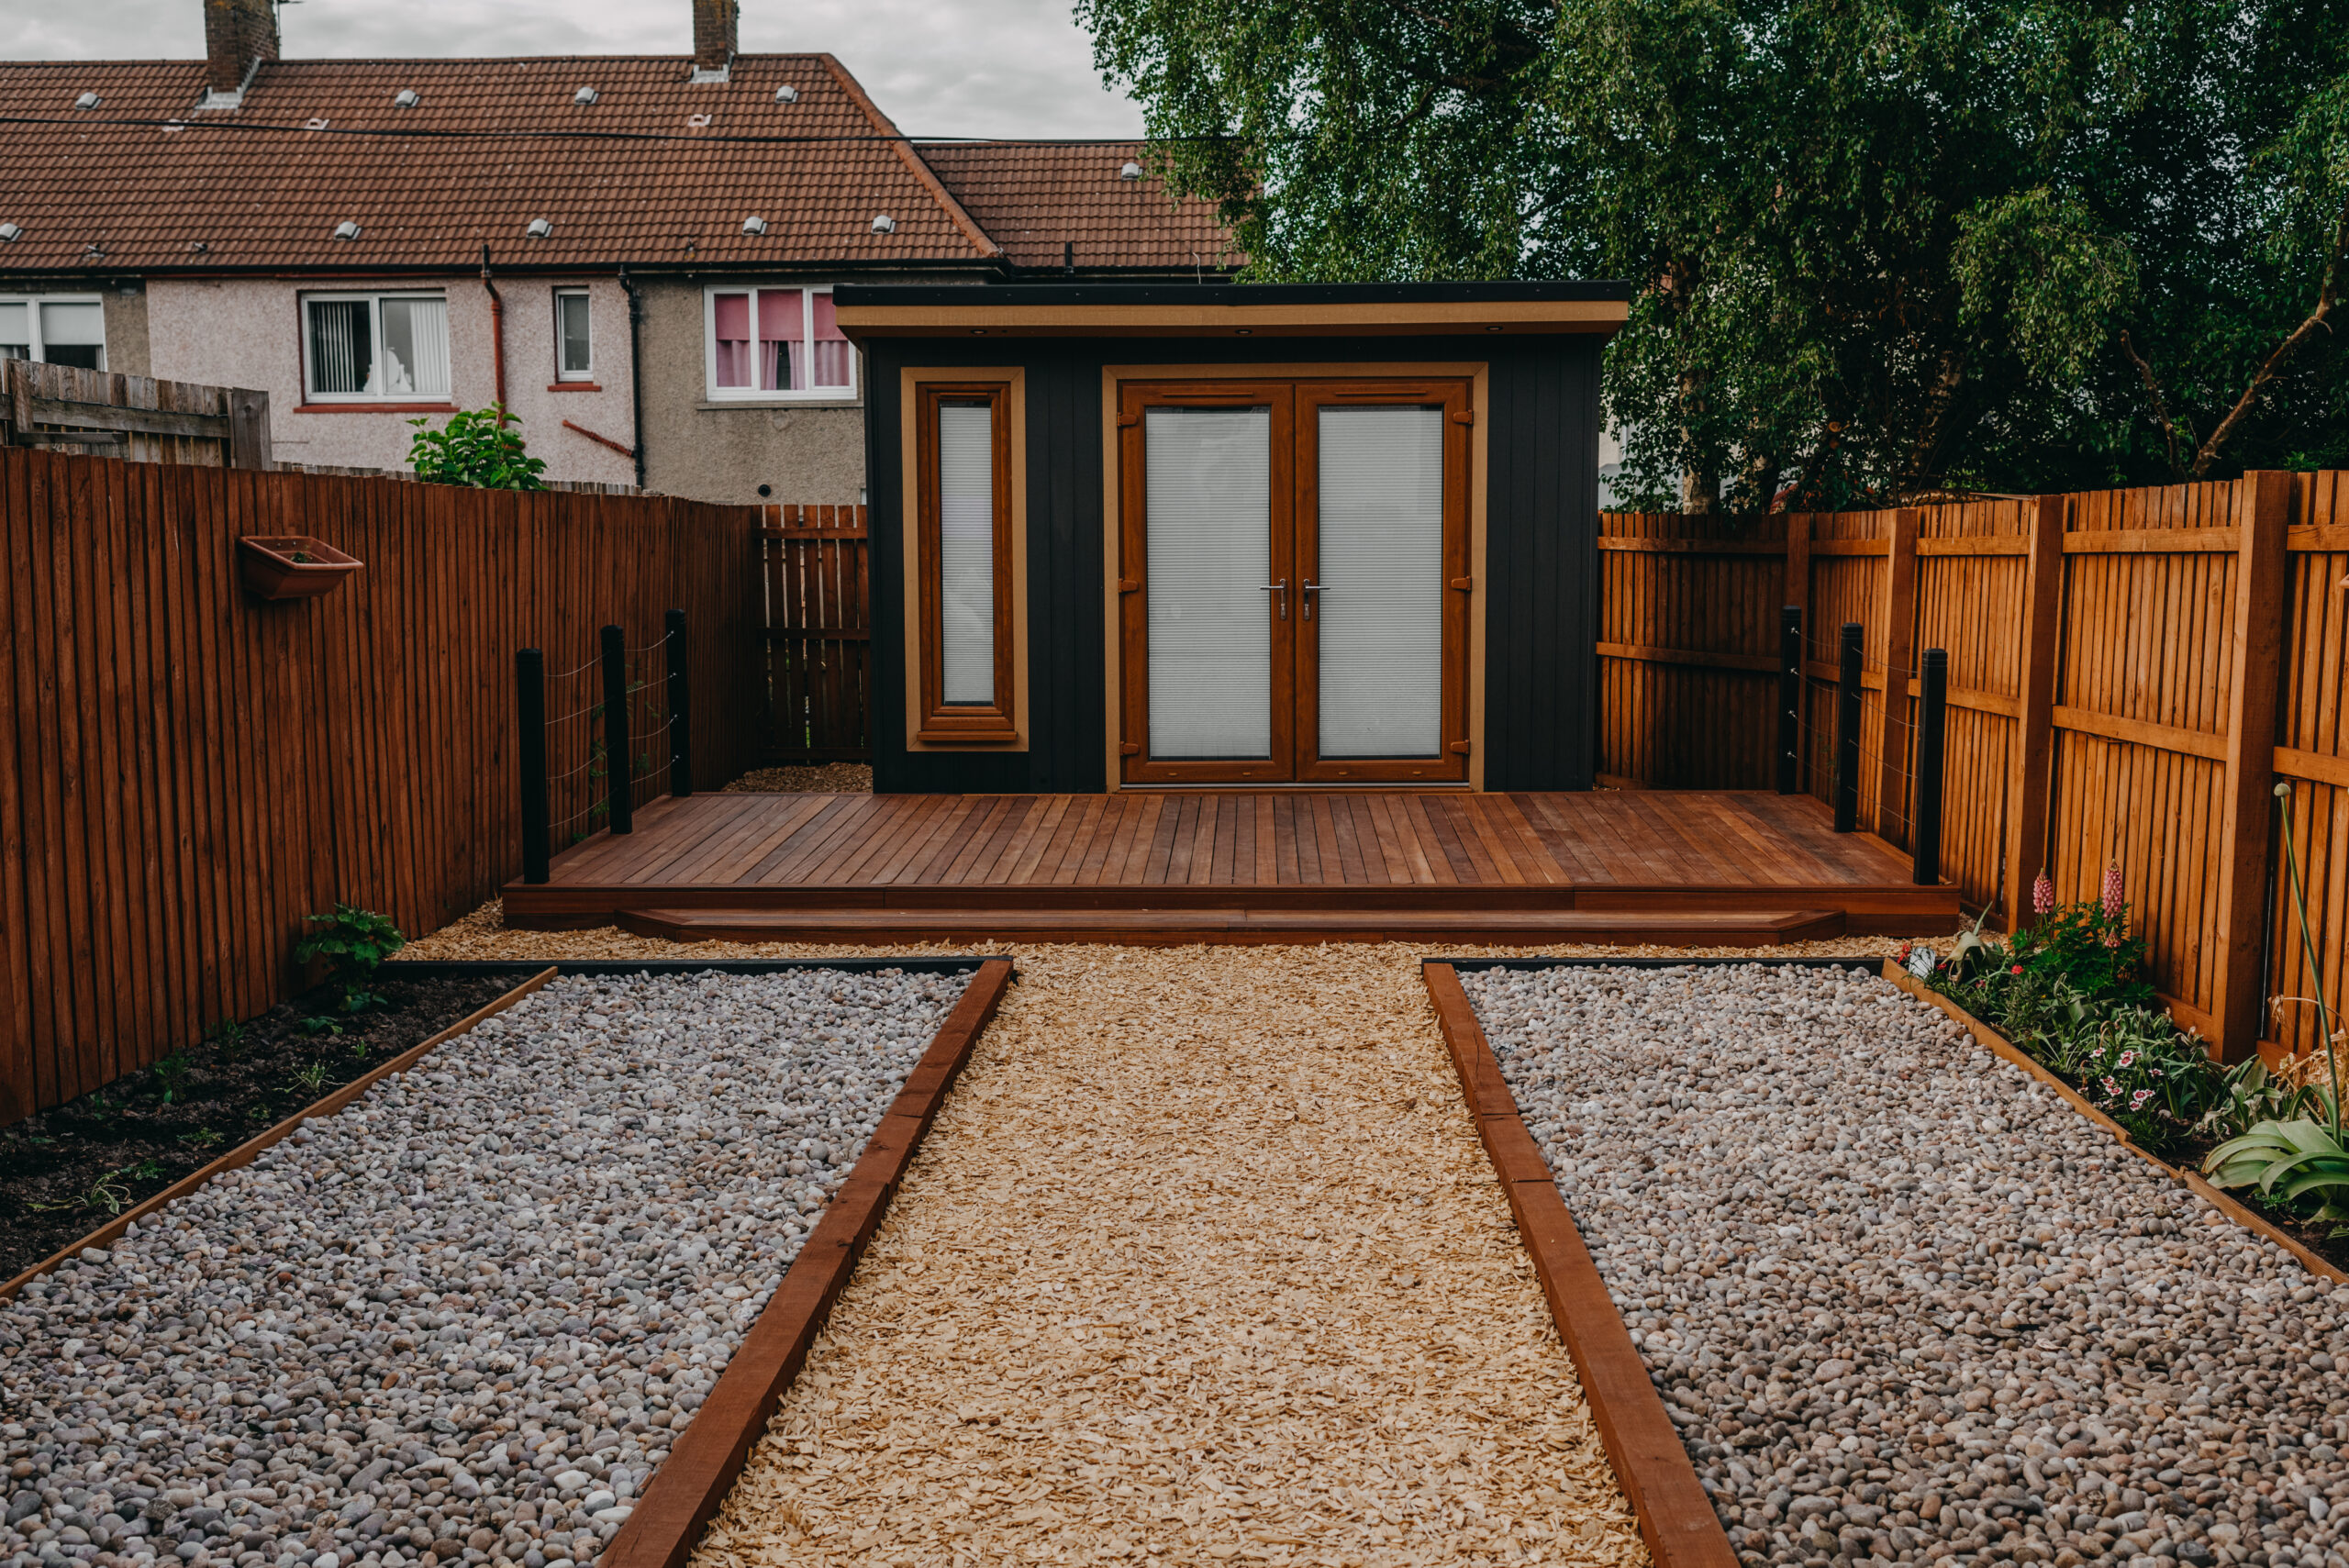 Timber decking norwich surrounding a garden rooms norwich by green machine